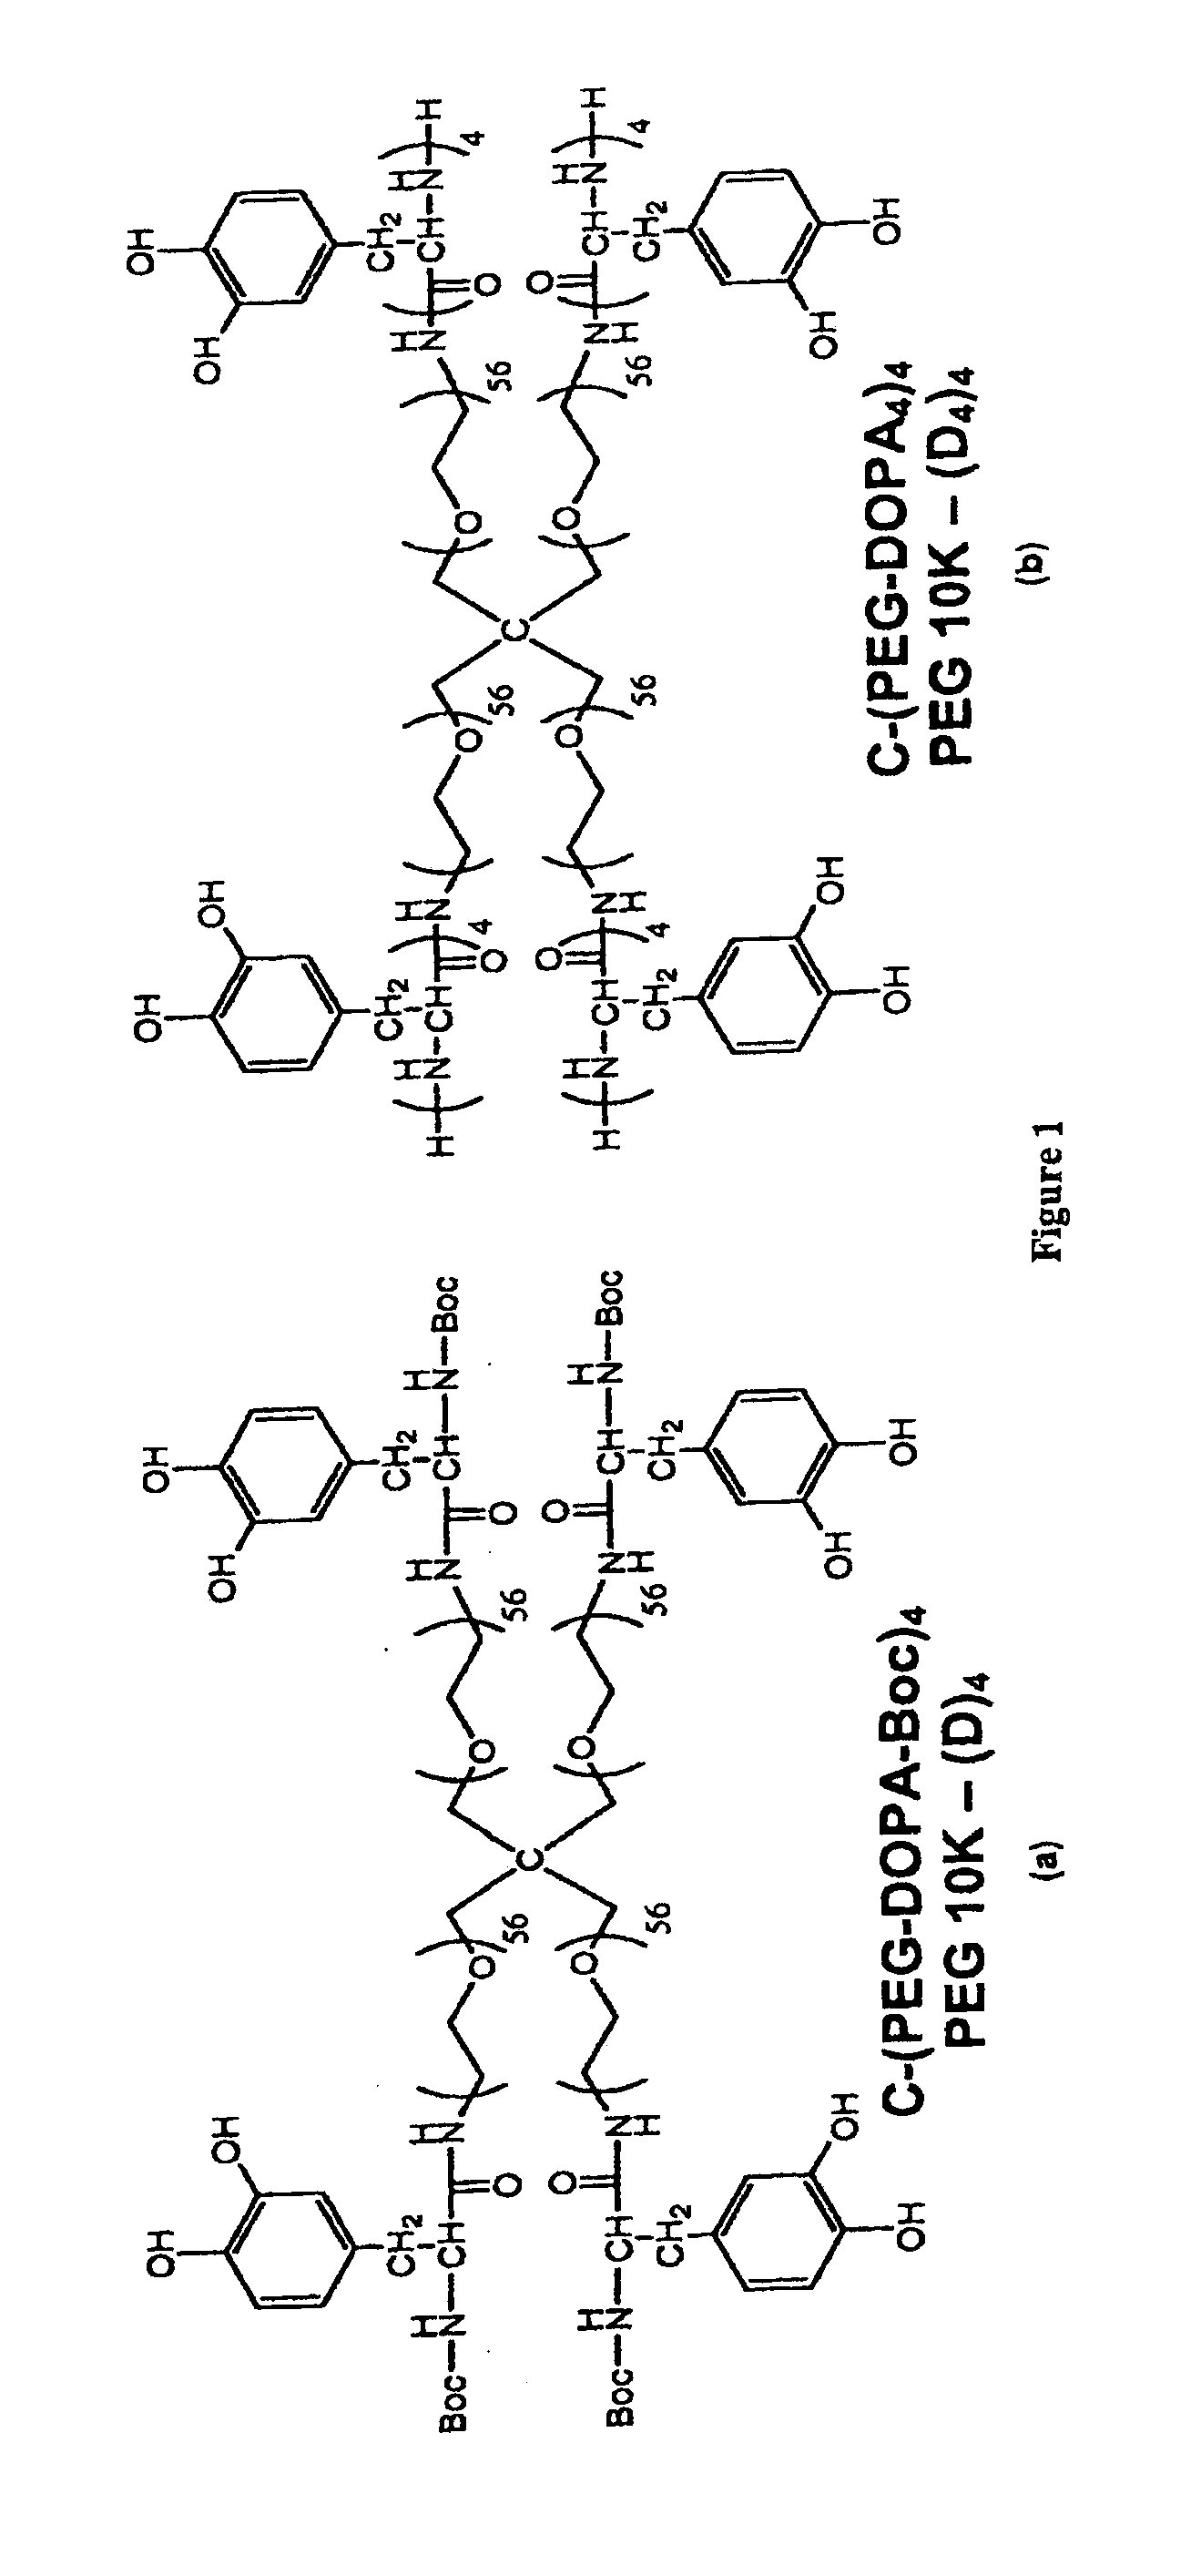 Dopa-functionalized, branched, poly(aklylene oxide) adhesives